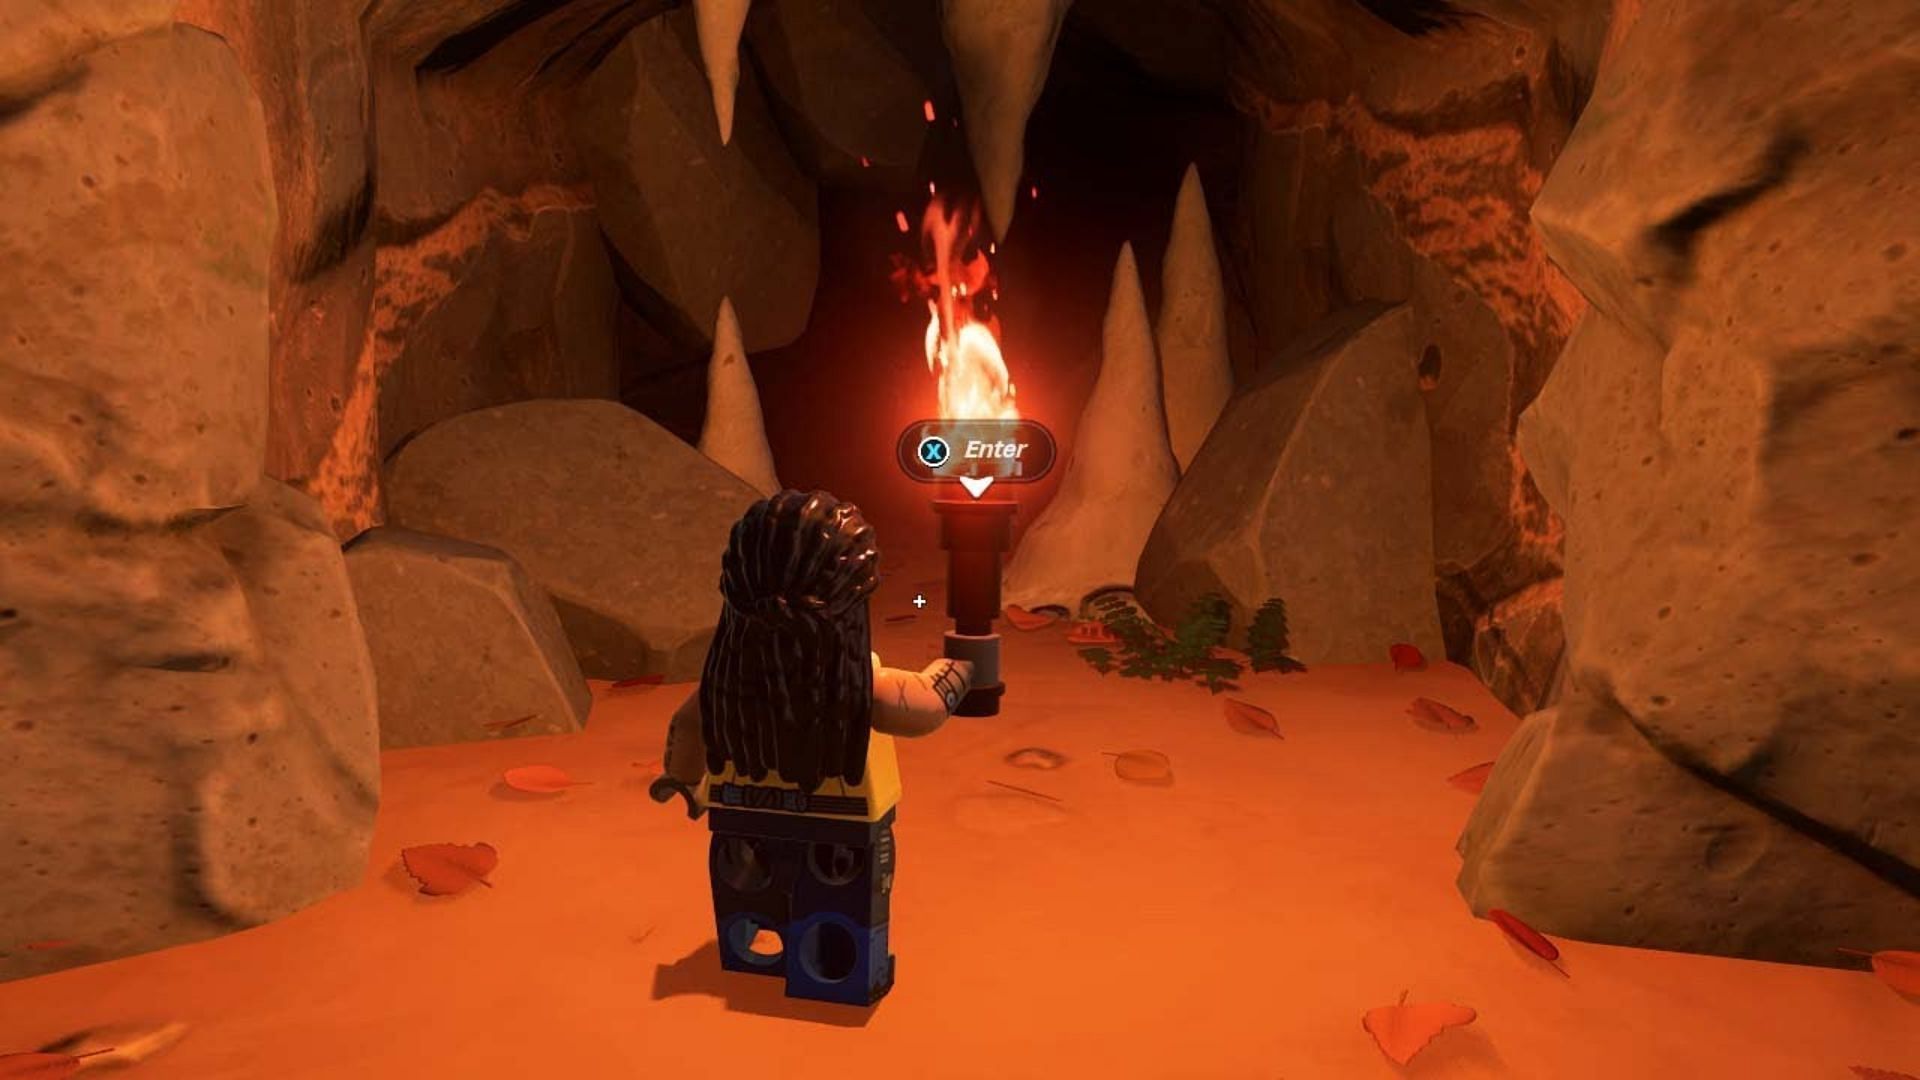 LEGO Fortnite players shocked to discover secret passages in caves